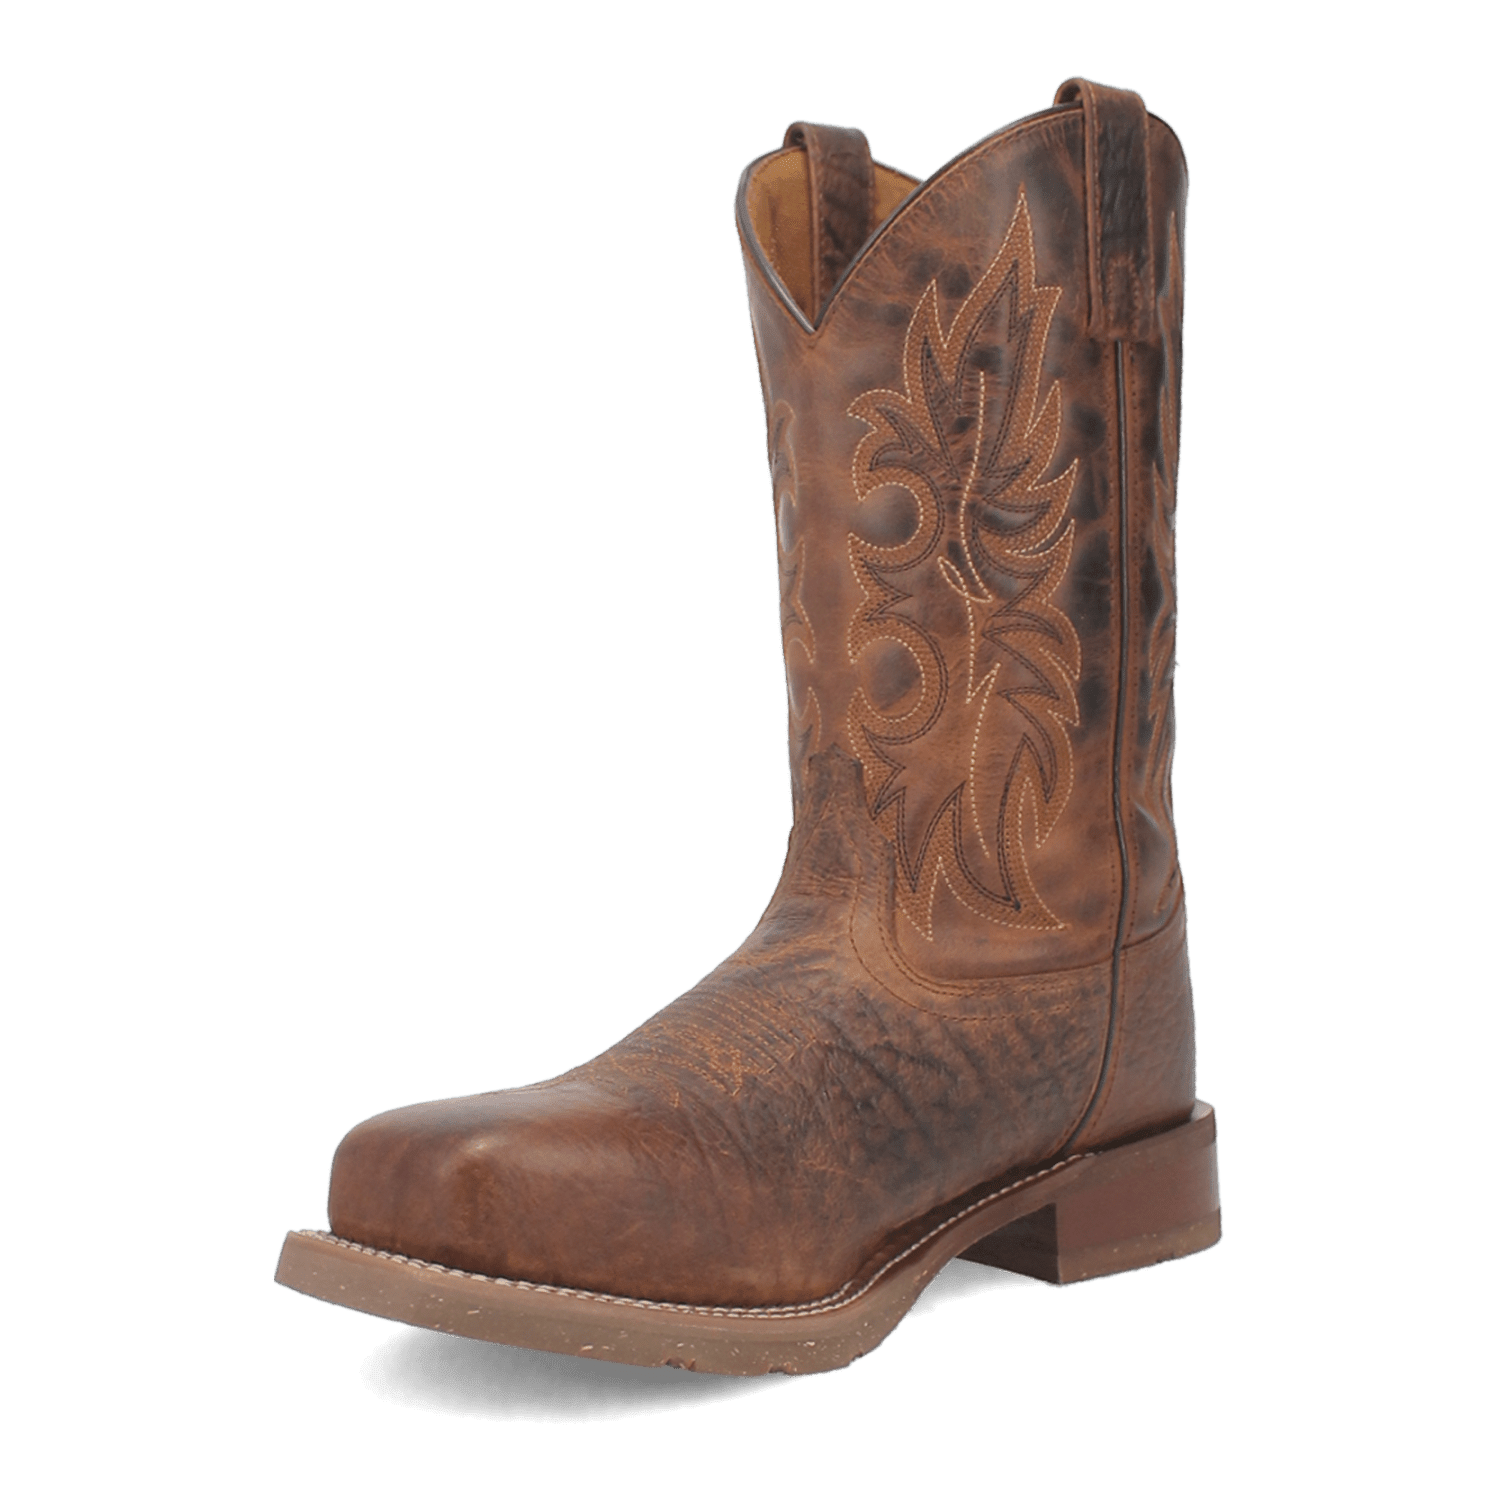 DURANT STEEL TOE LEATHER BOOT Image